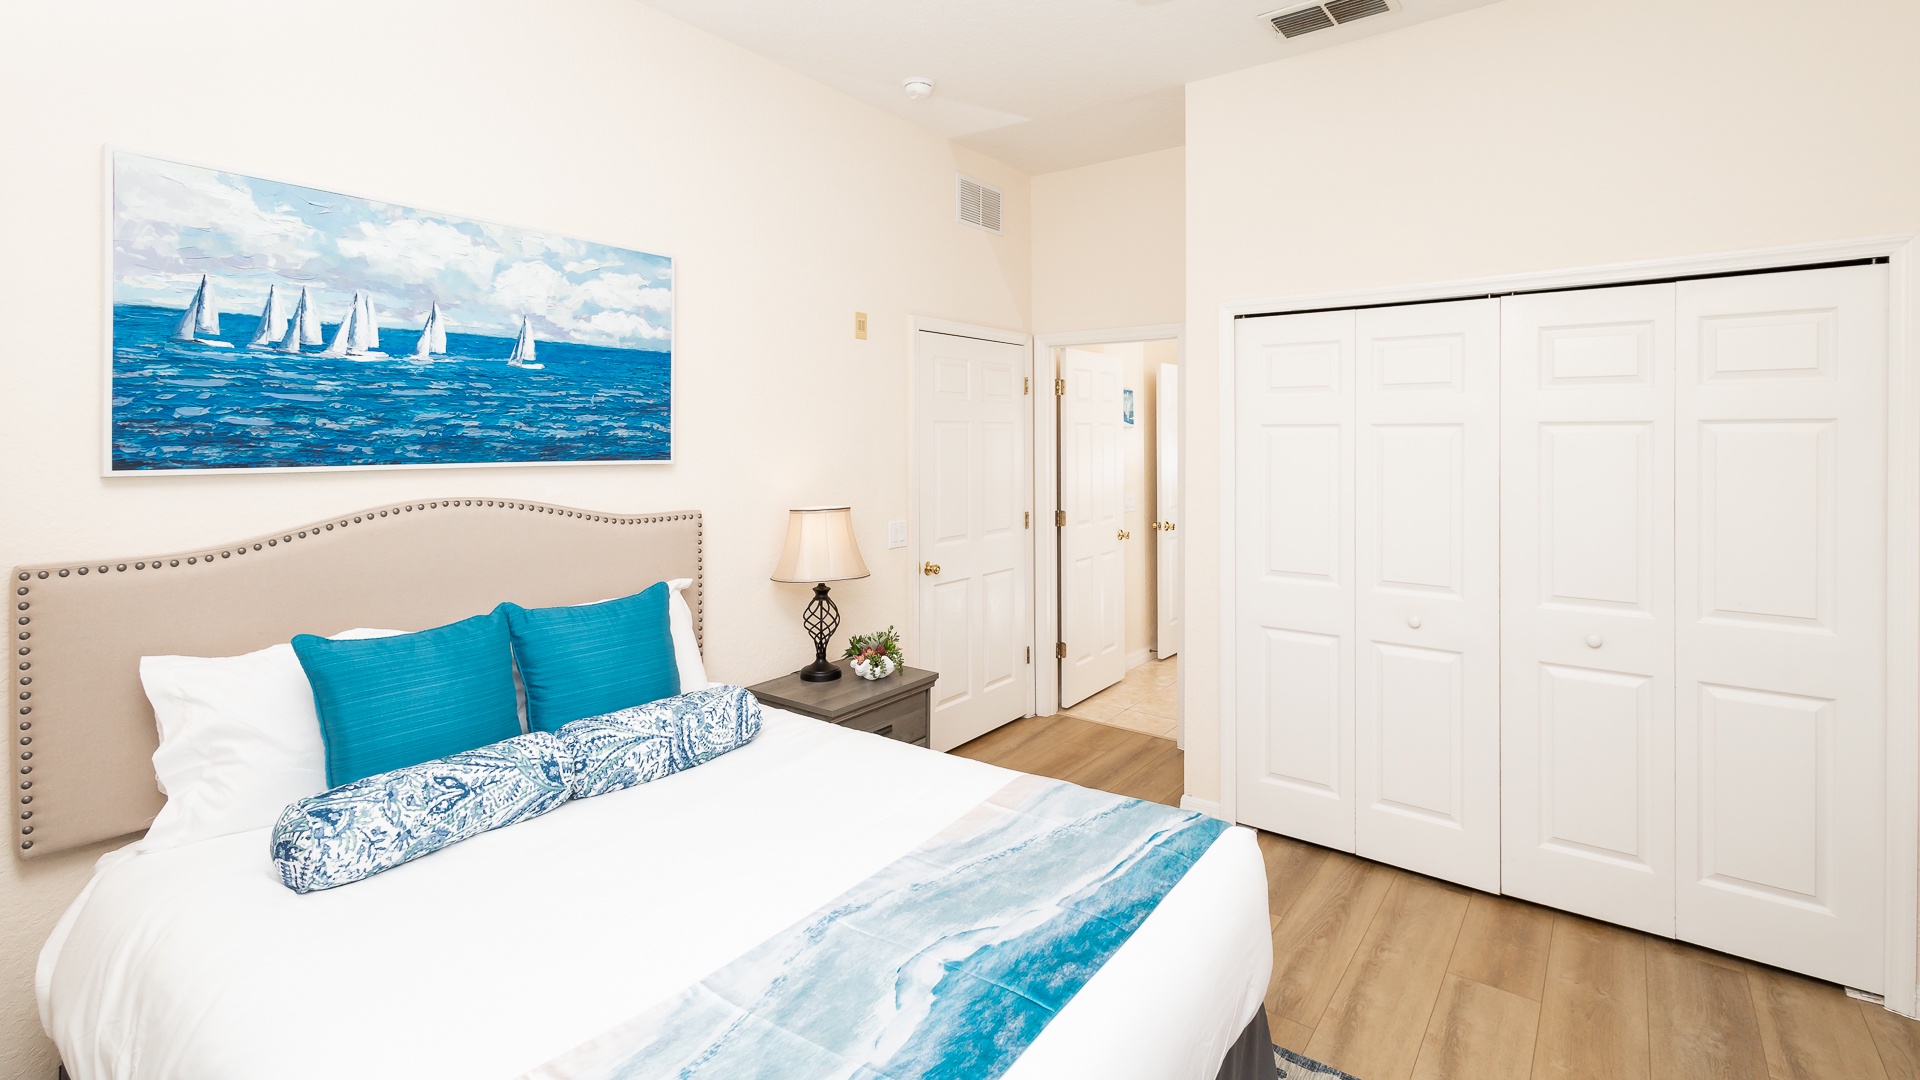 The 2nd bedroom offers a plush queen bed, balcony, Smart TV, & attached bath